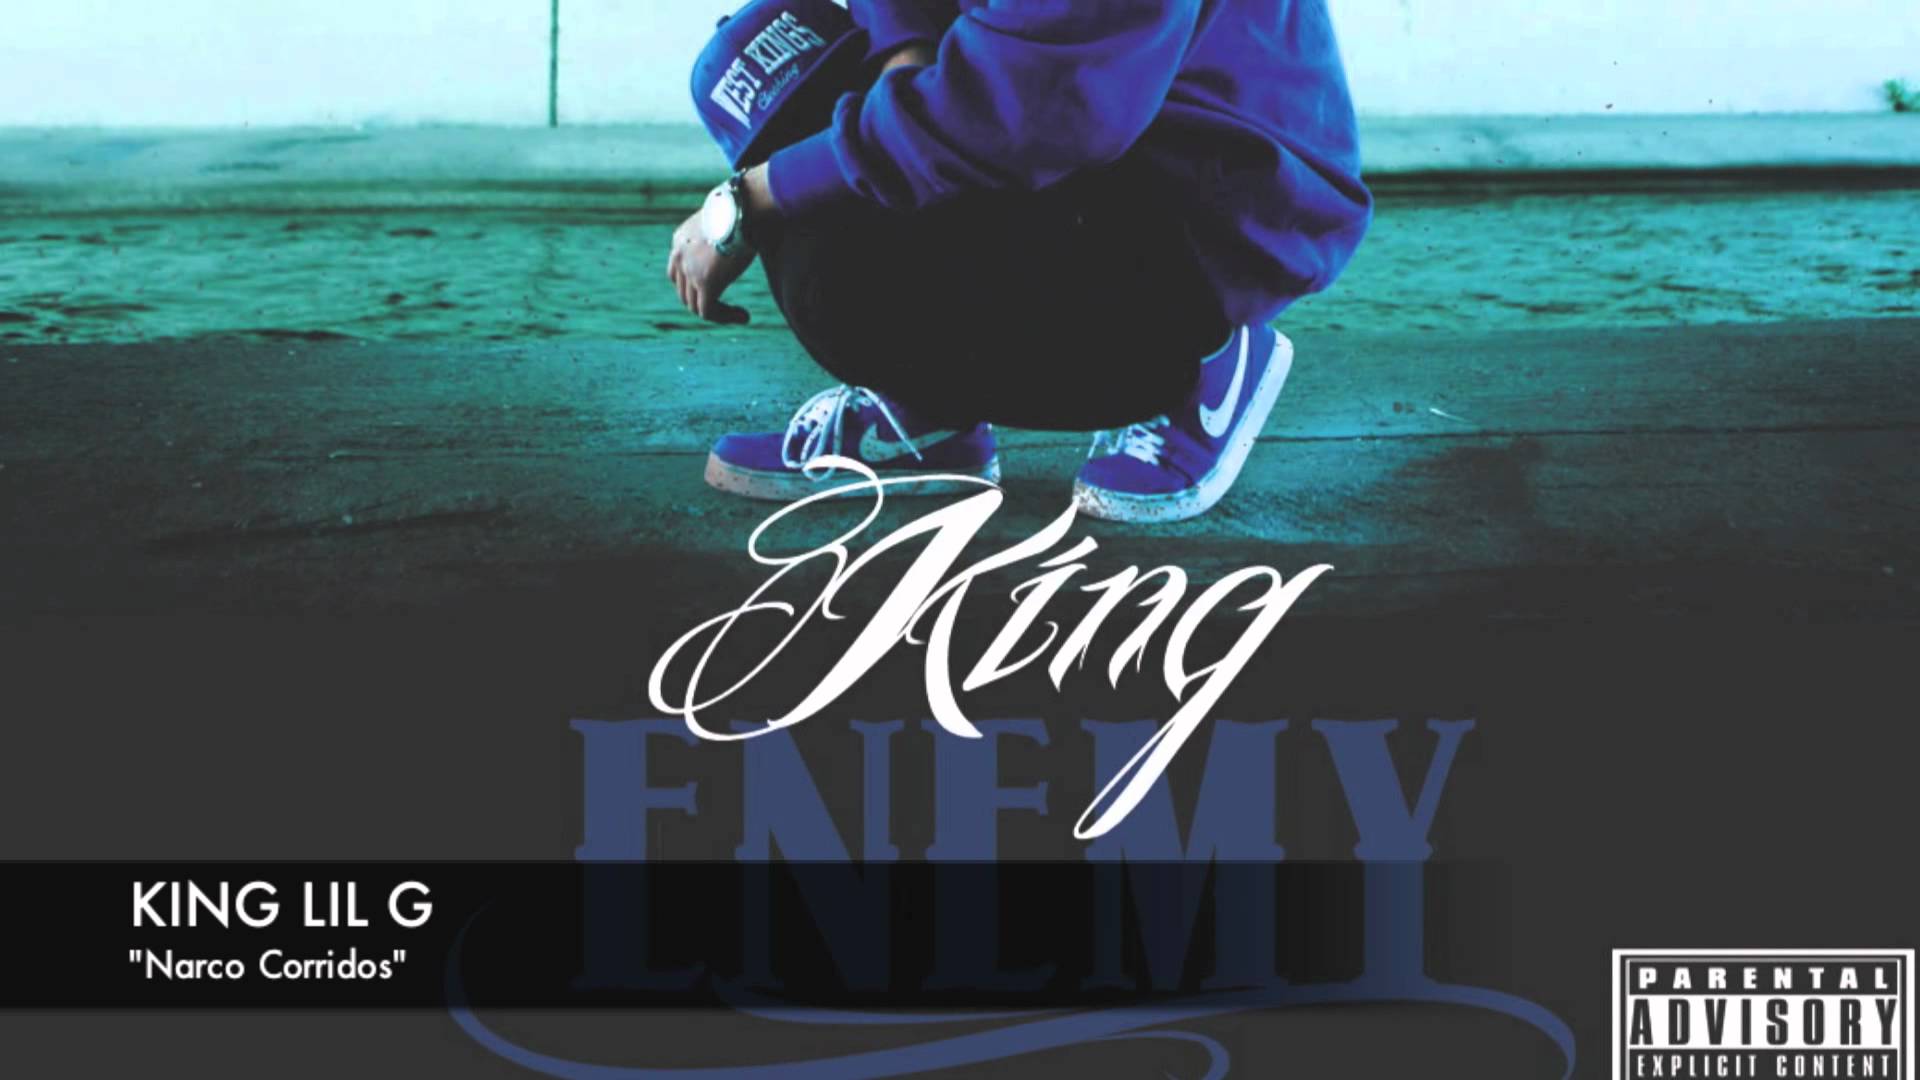 king lil g wallpaper,font,cool,photography,recreation,graphic design